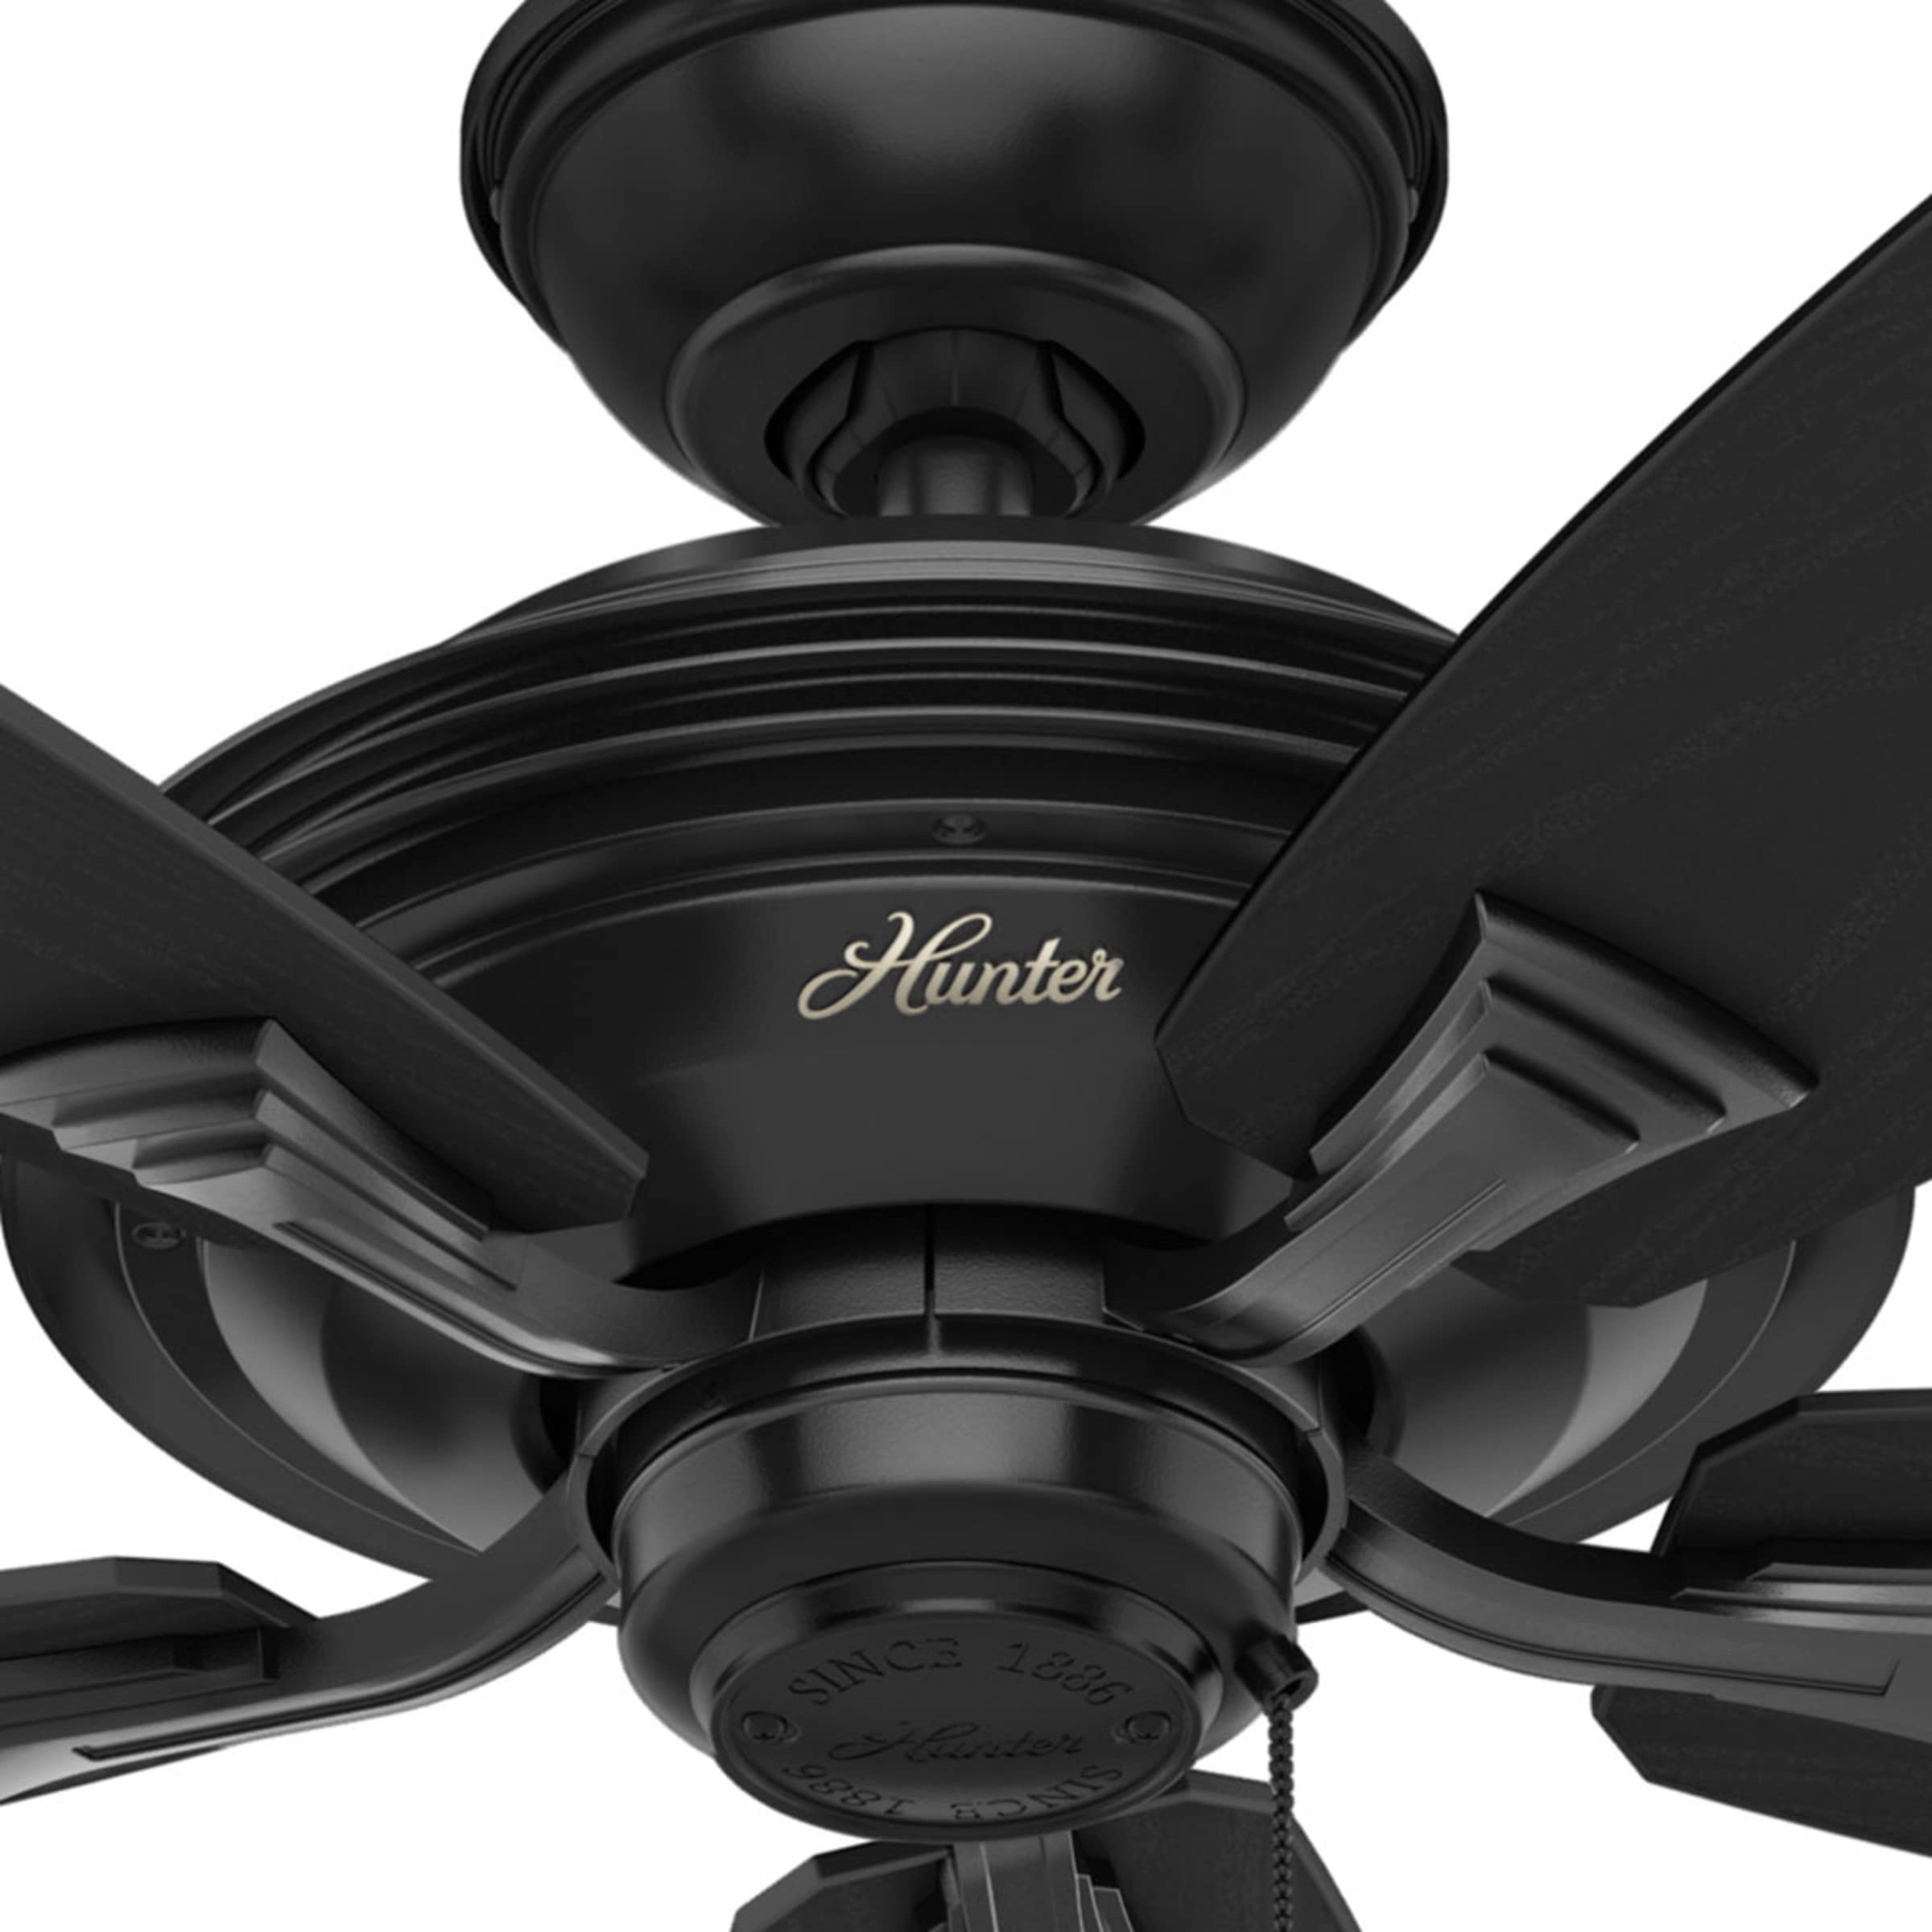 Hunter Fan Company, 53348, 52 inch Rainsford Matte Black Indoor/Outdoor Ceiling Fan and Pull Chain